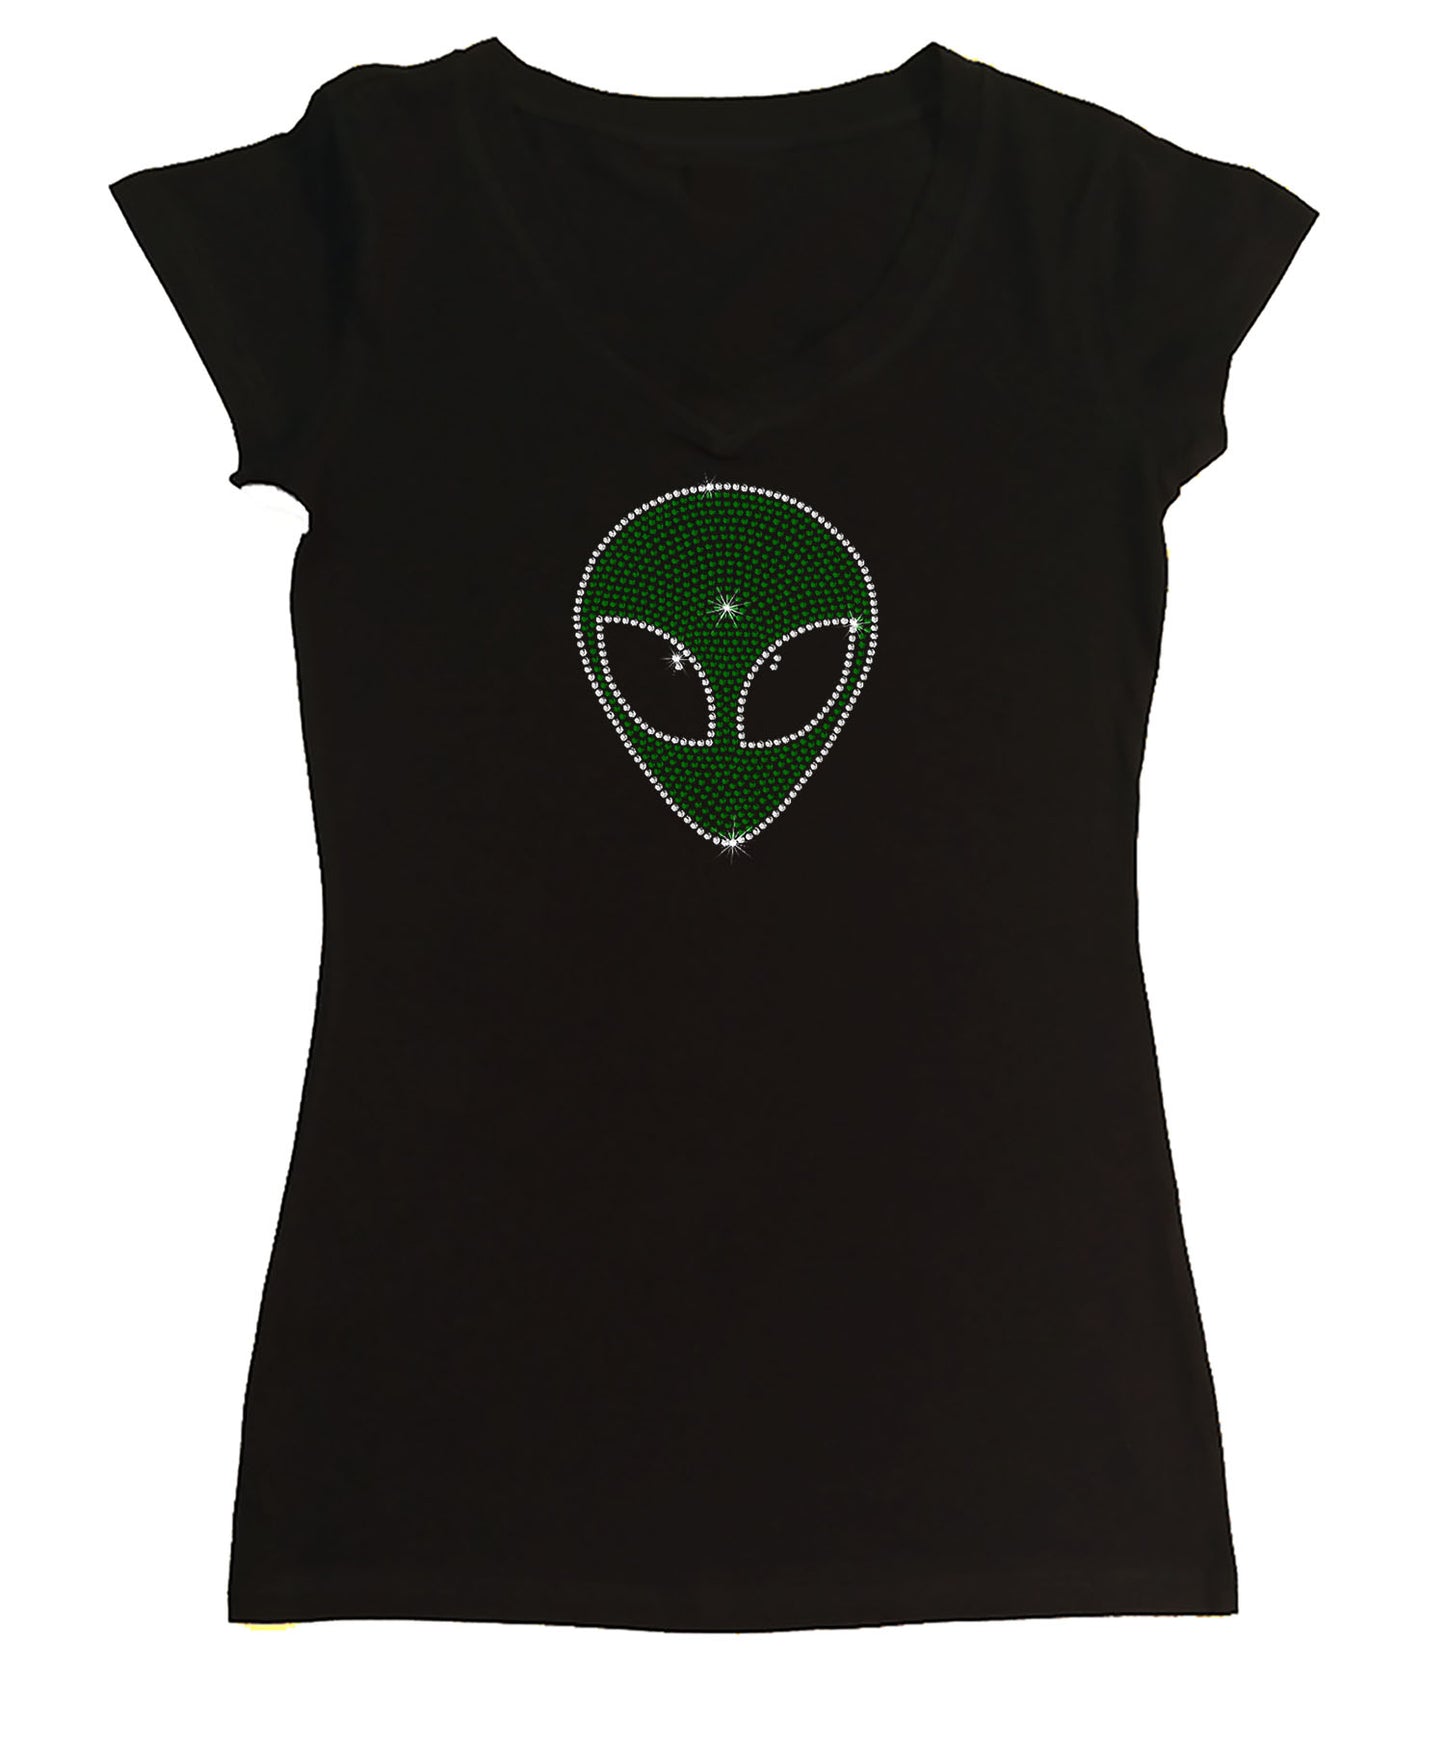 Womens T-shirt with Alien Face in Rhinestones